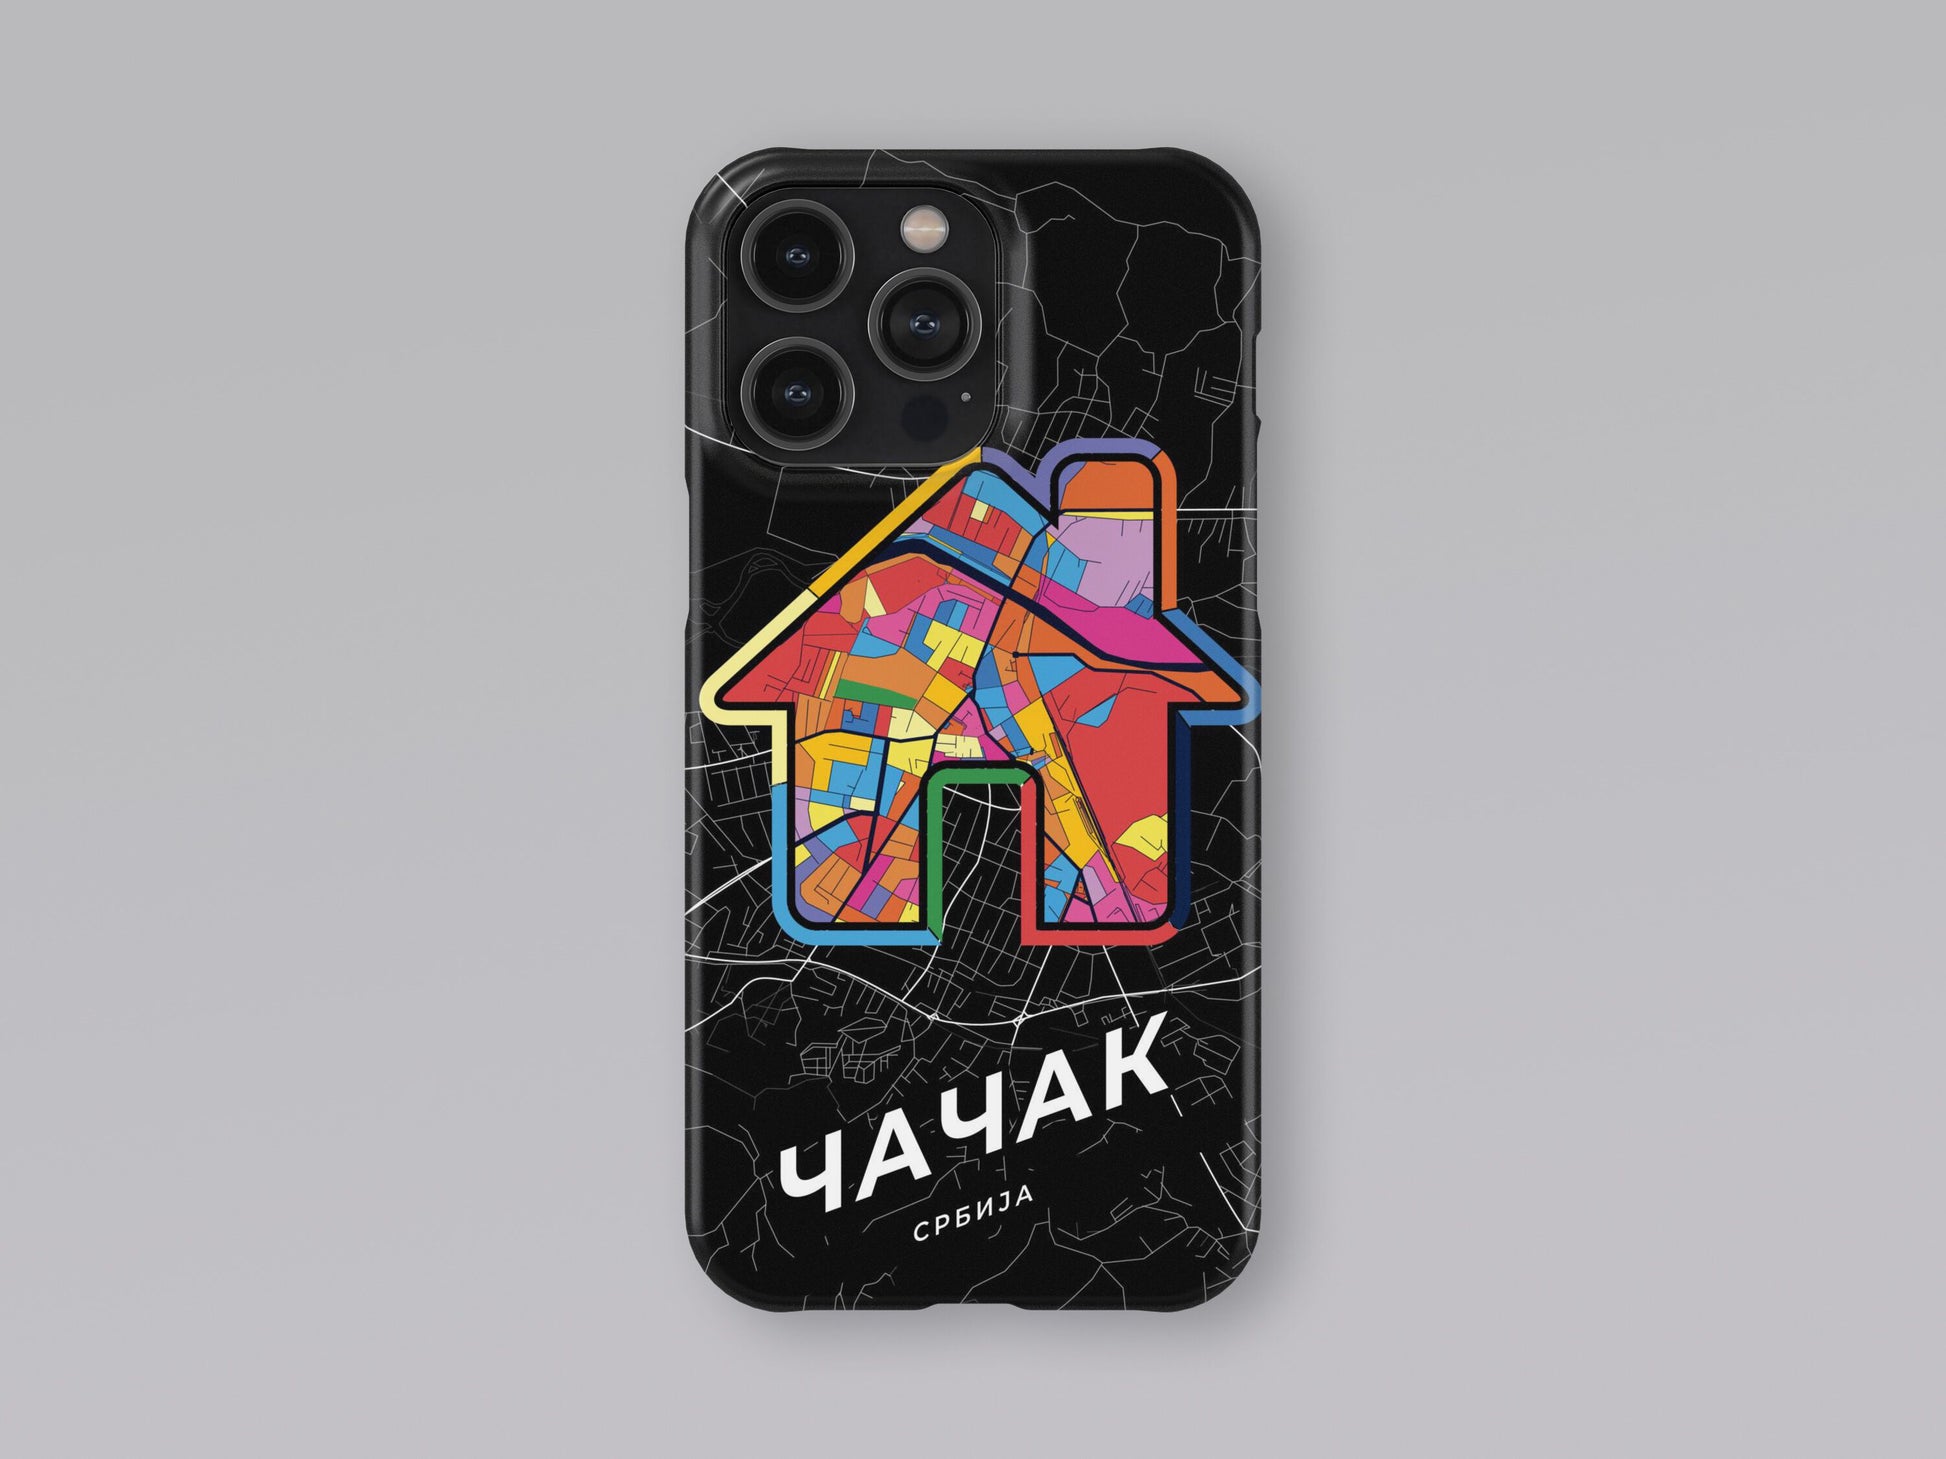 Čačak Serbia slim phone case with colorful icon. Birthday, wedding or housewarming gift. Couple match cases. 3